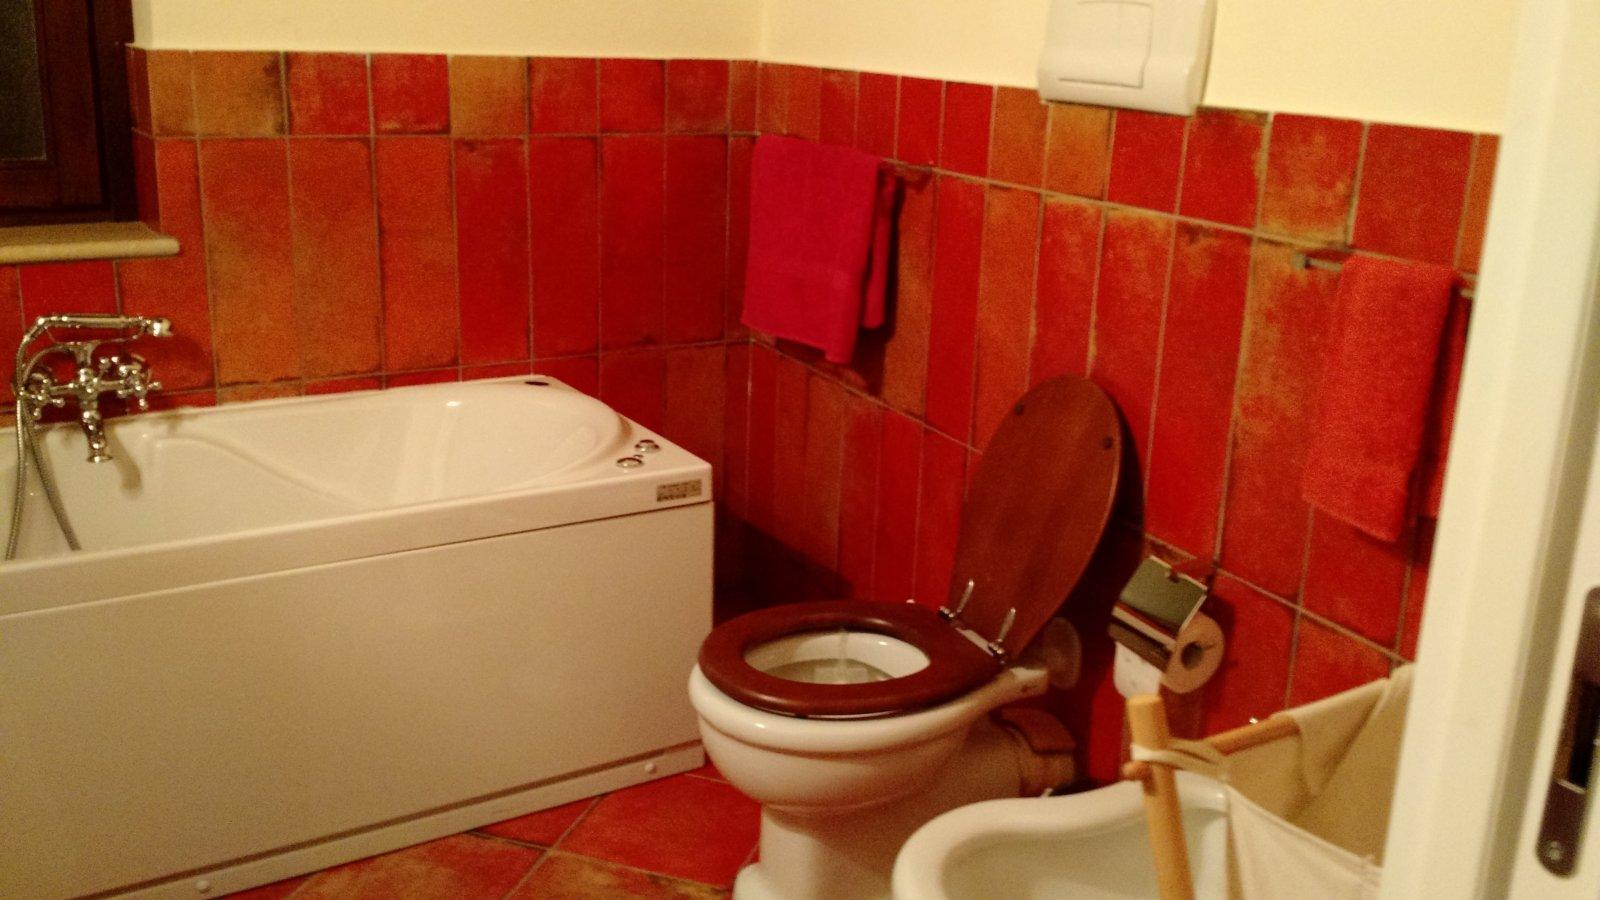 Loved the soaking tub and burnt umber tile.